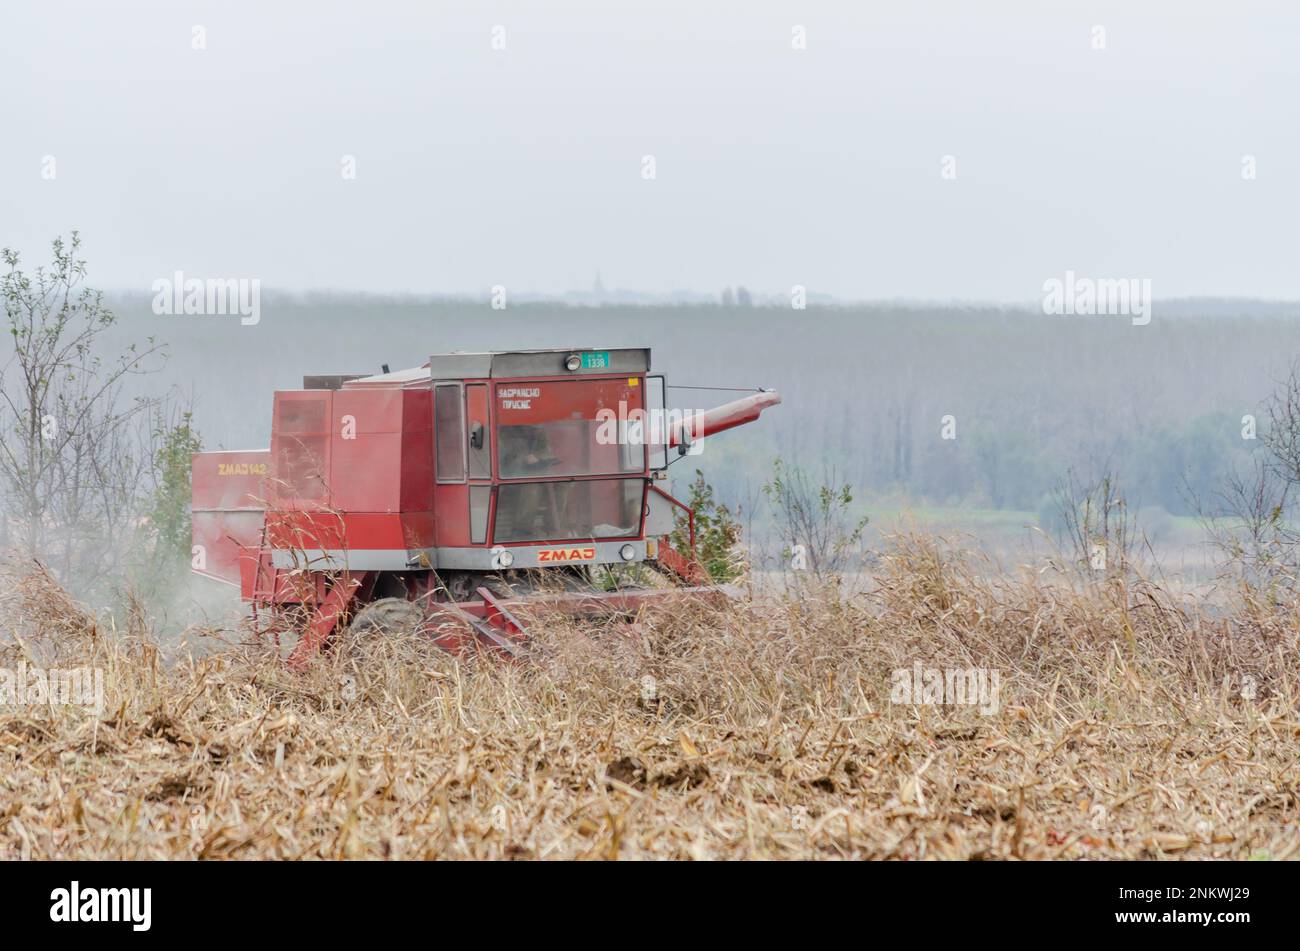 A tractor is seen plowing a field, churning up soil and weeds in the process Stock Photo